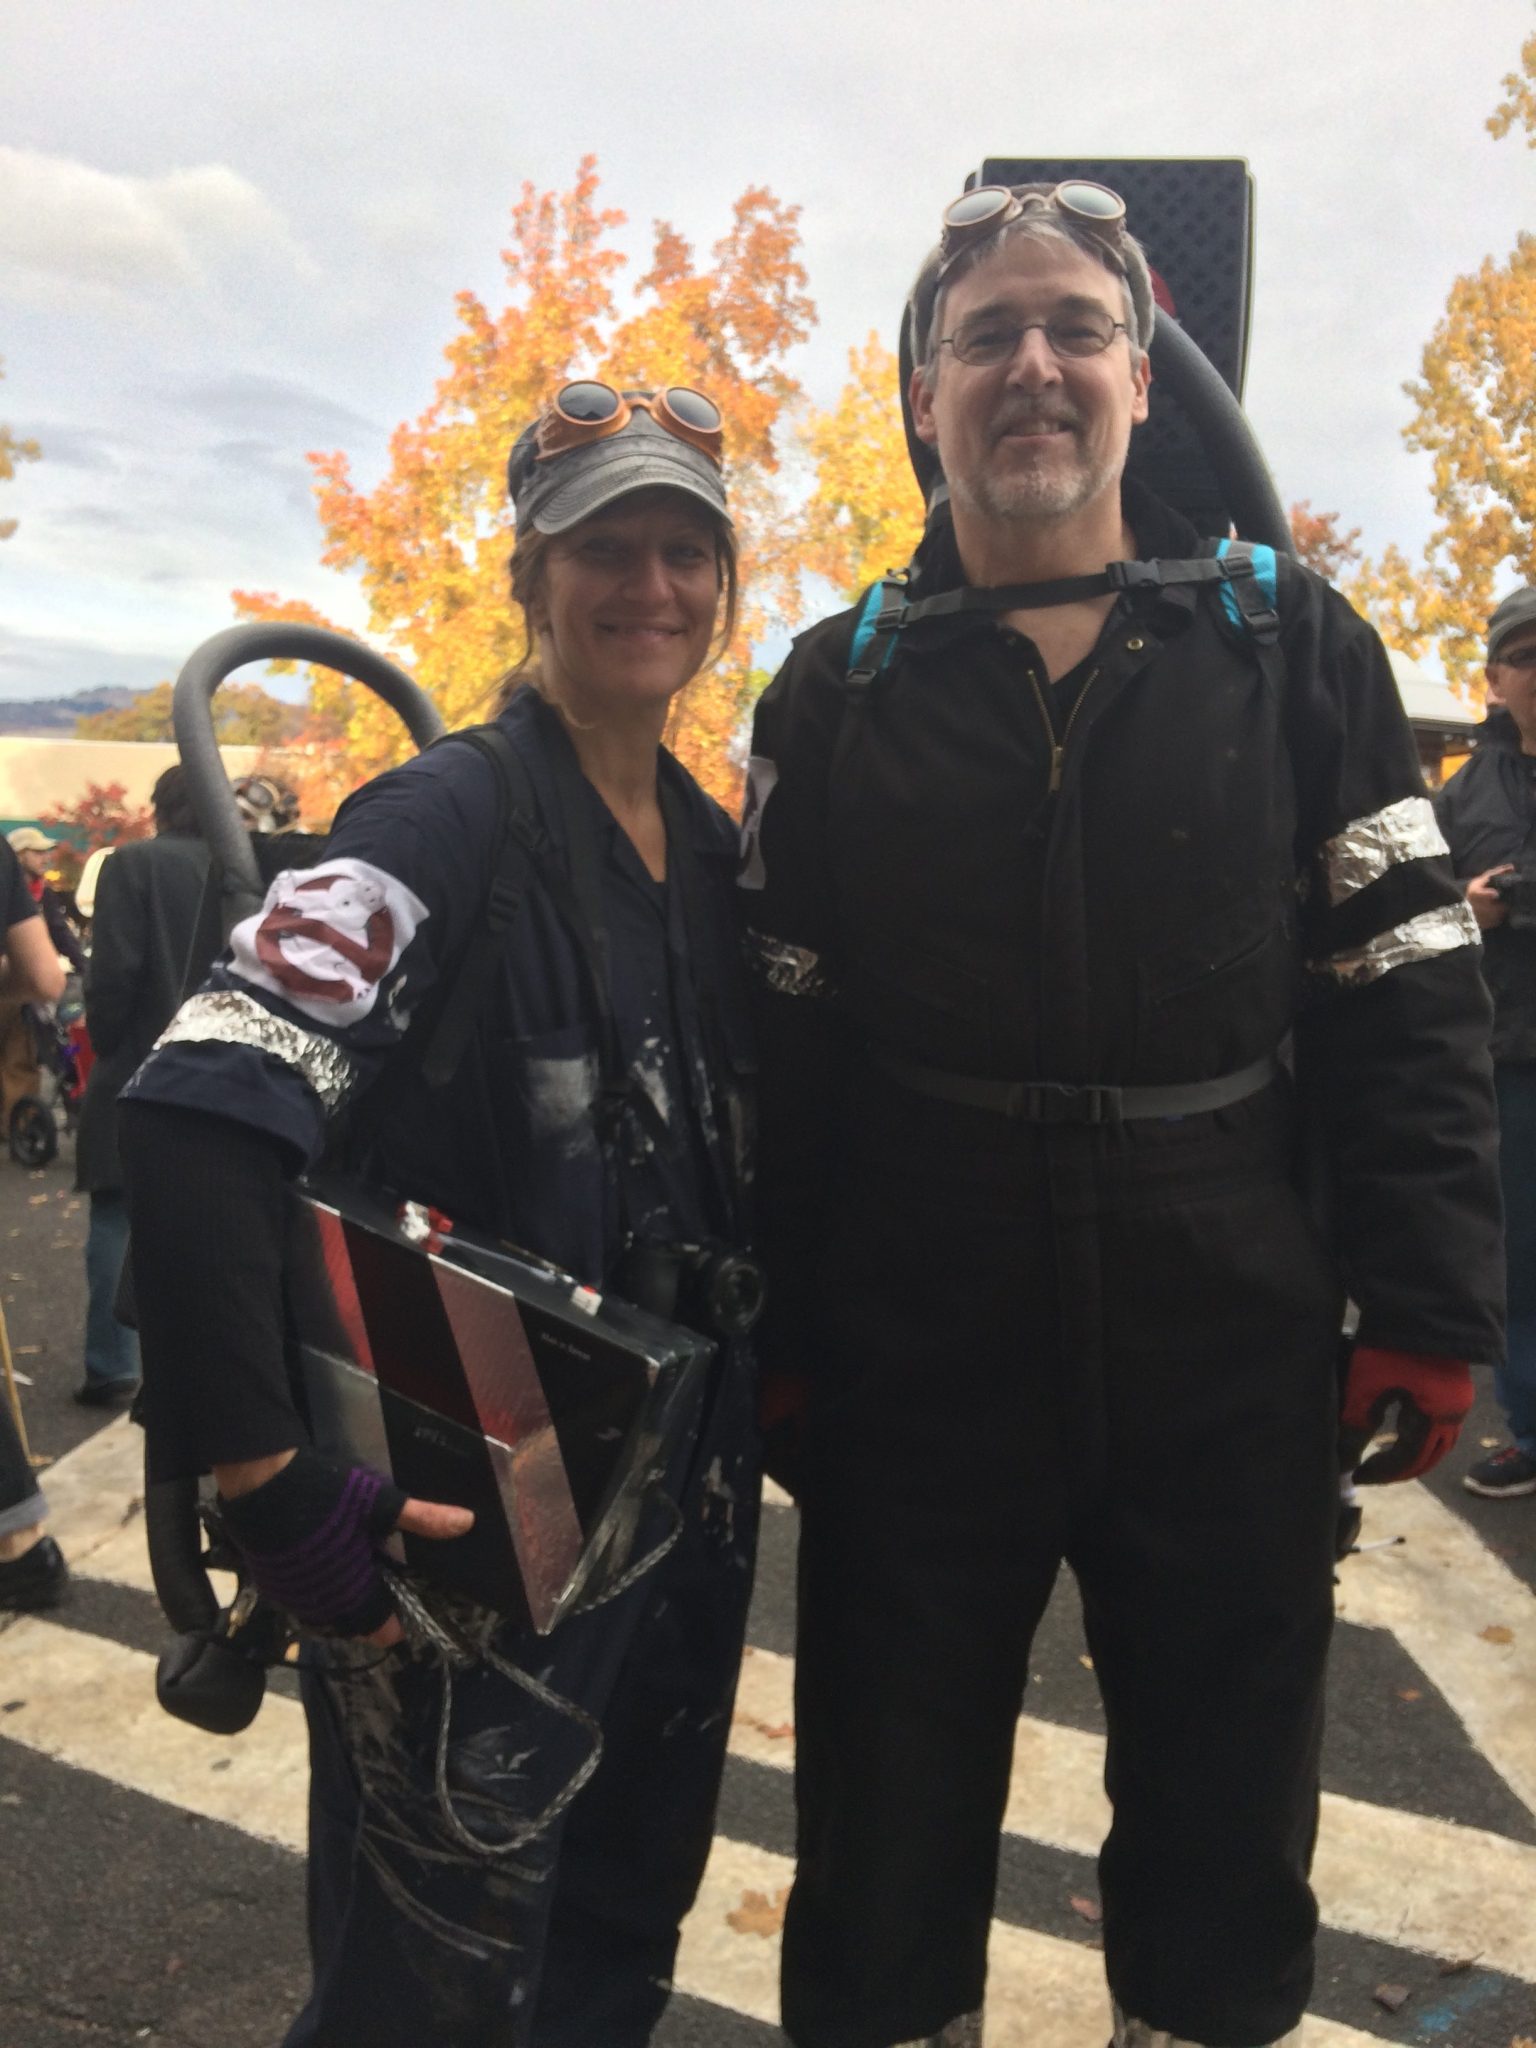 Who you gonna call? Ghostbusters at Ashland, Oregon's Halloween parade